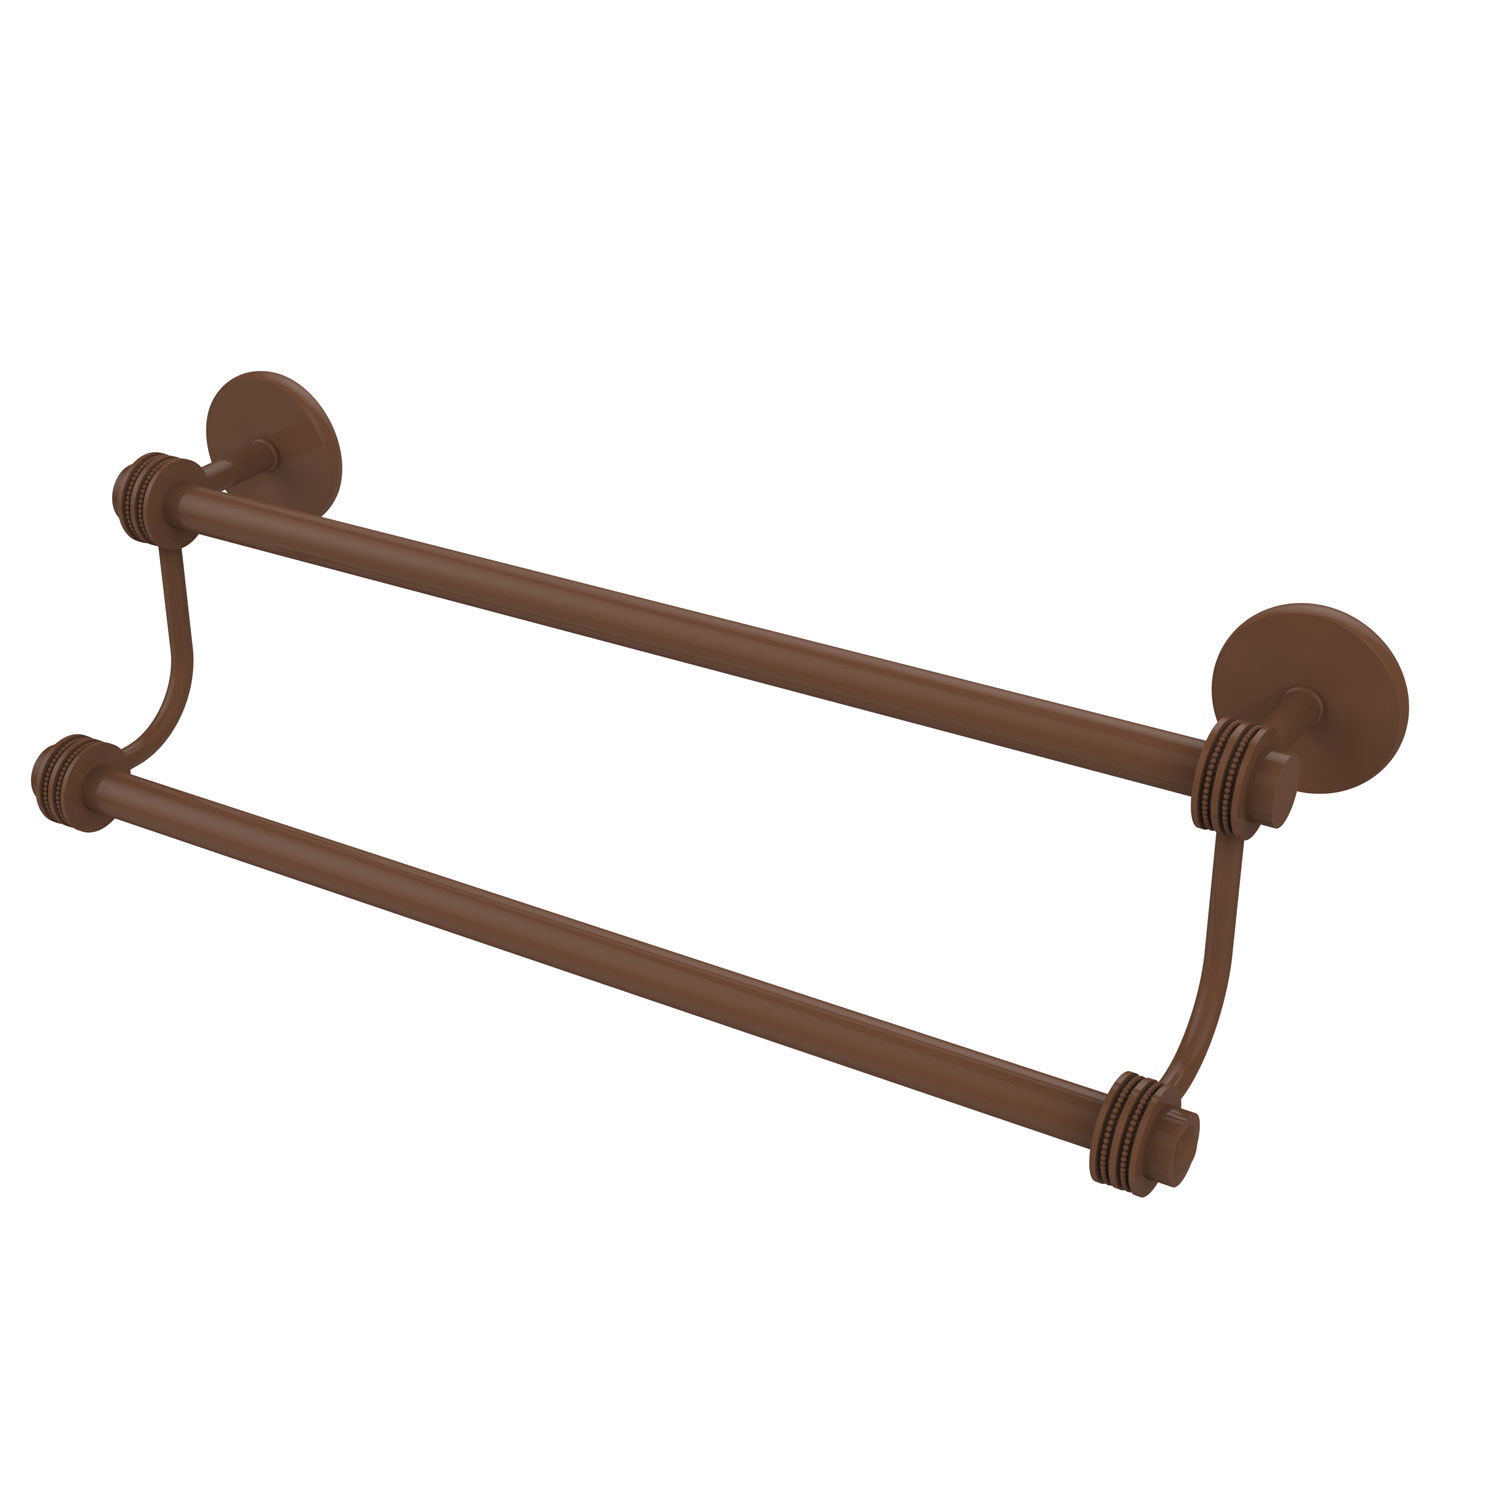 Allied Brass Satellite Orbit Two Collection 36 Inch Towel Bar with 